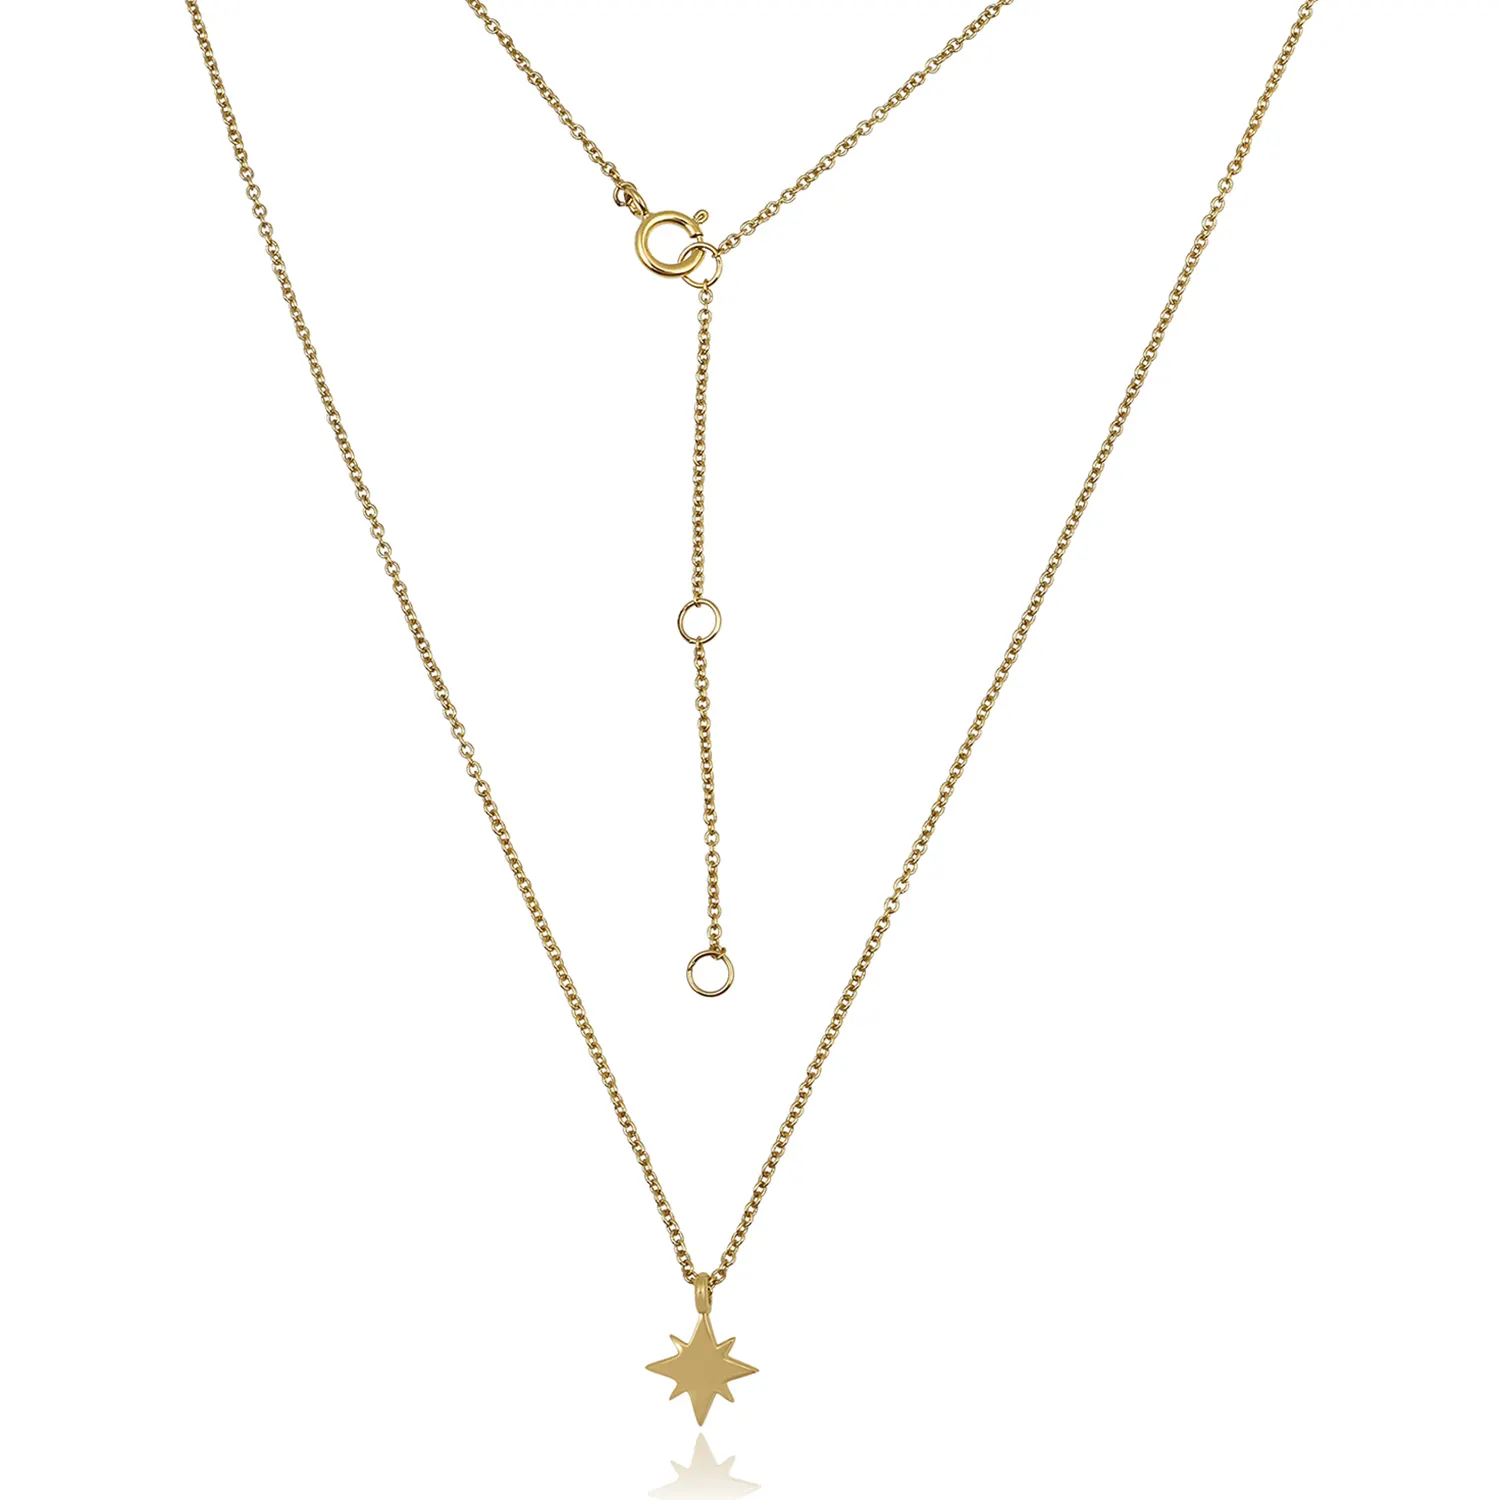 Beautiful little star shaped 18K gold plated 925 silver pendant necklace jewelry